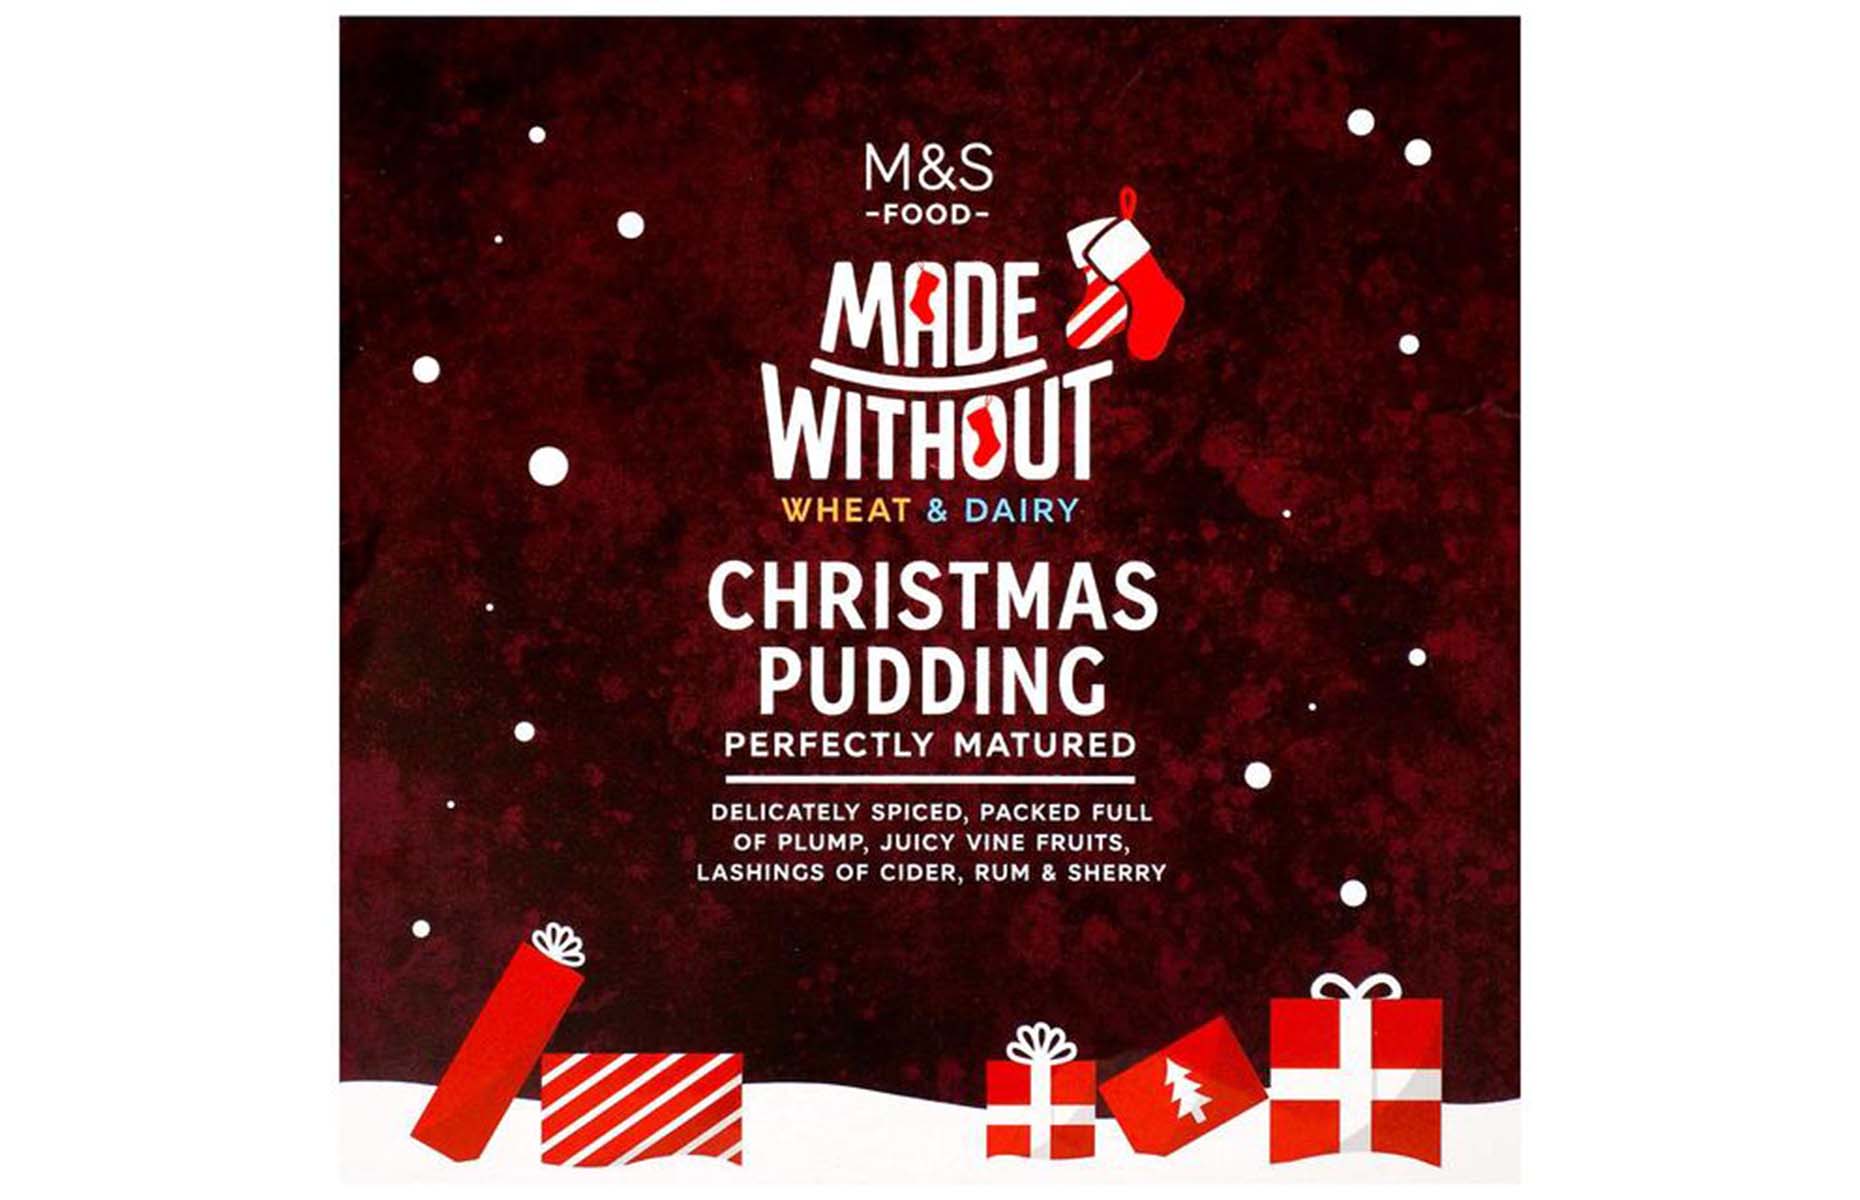 M&S Made Without Christmas pudding 2021